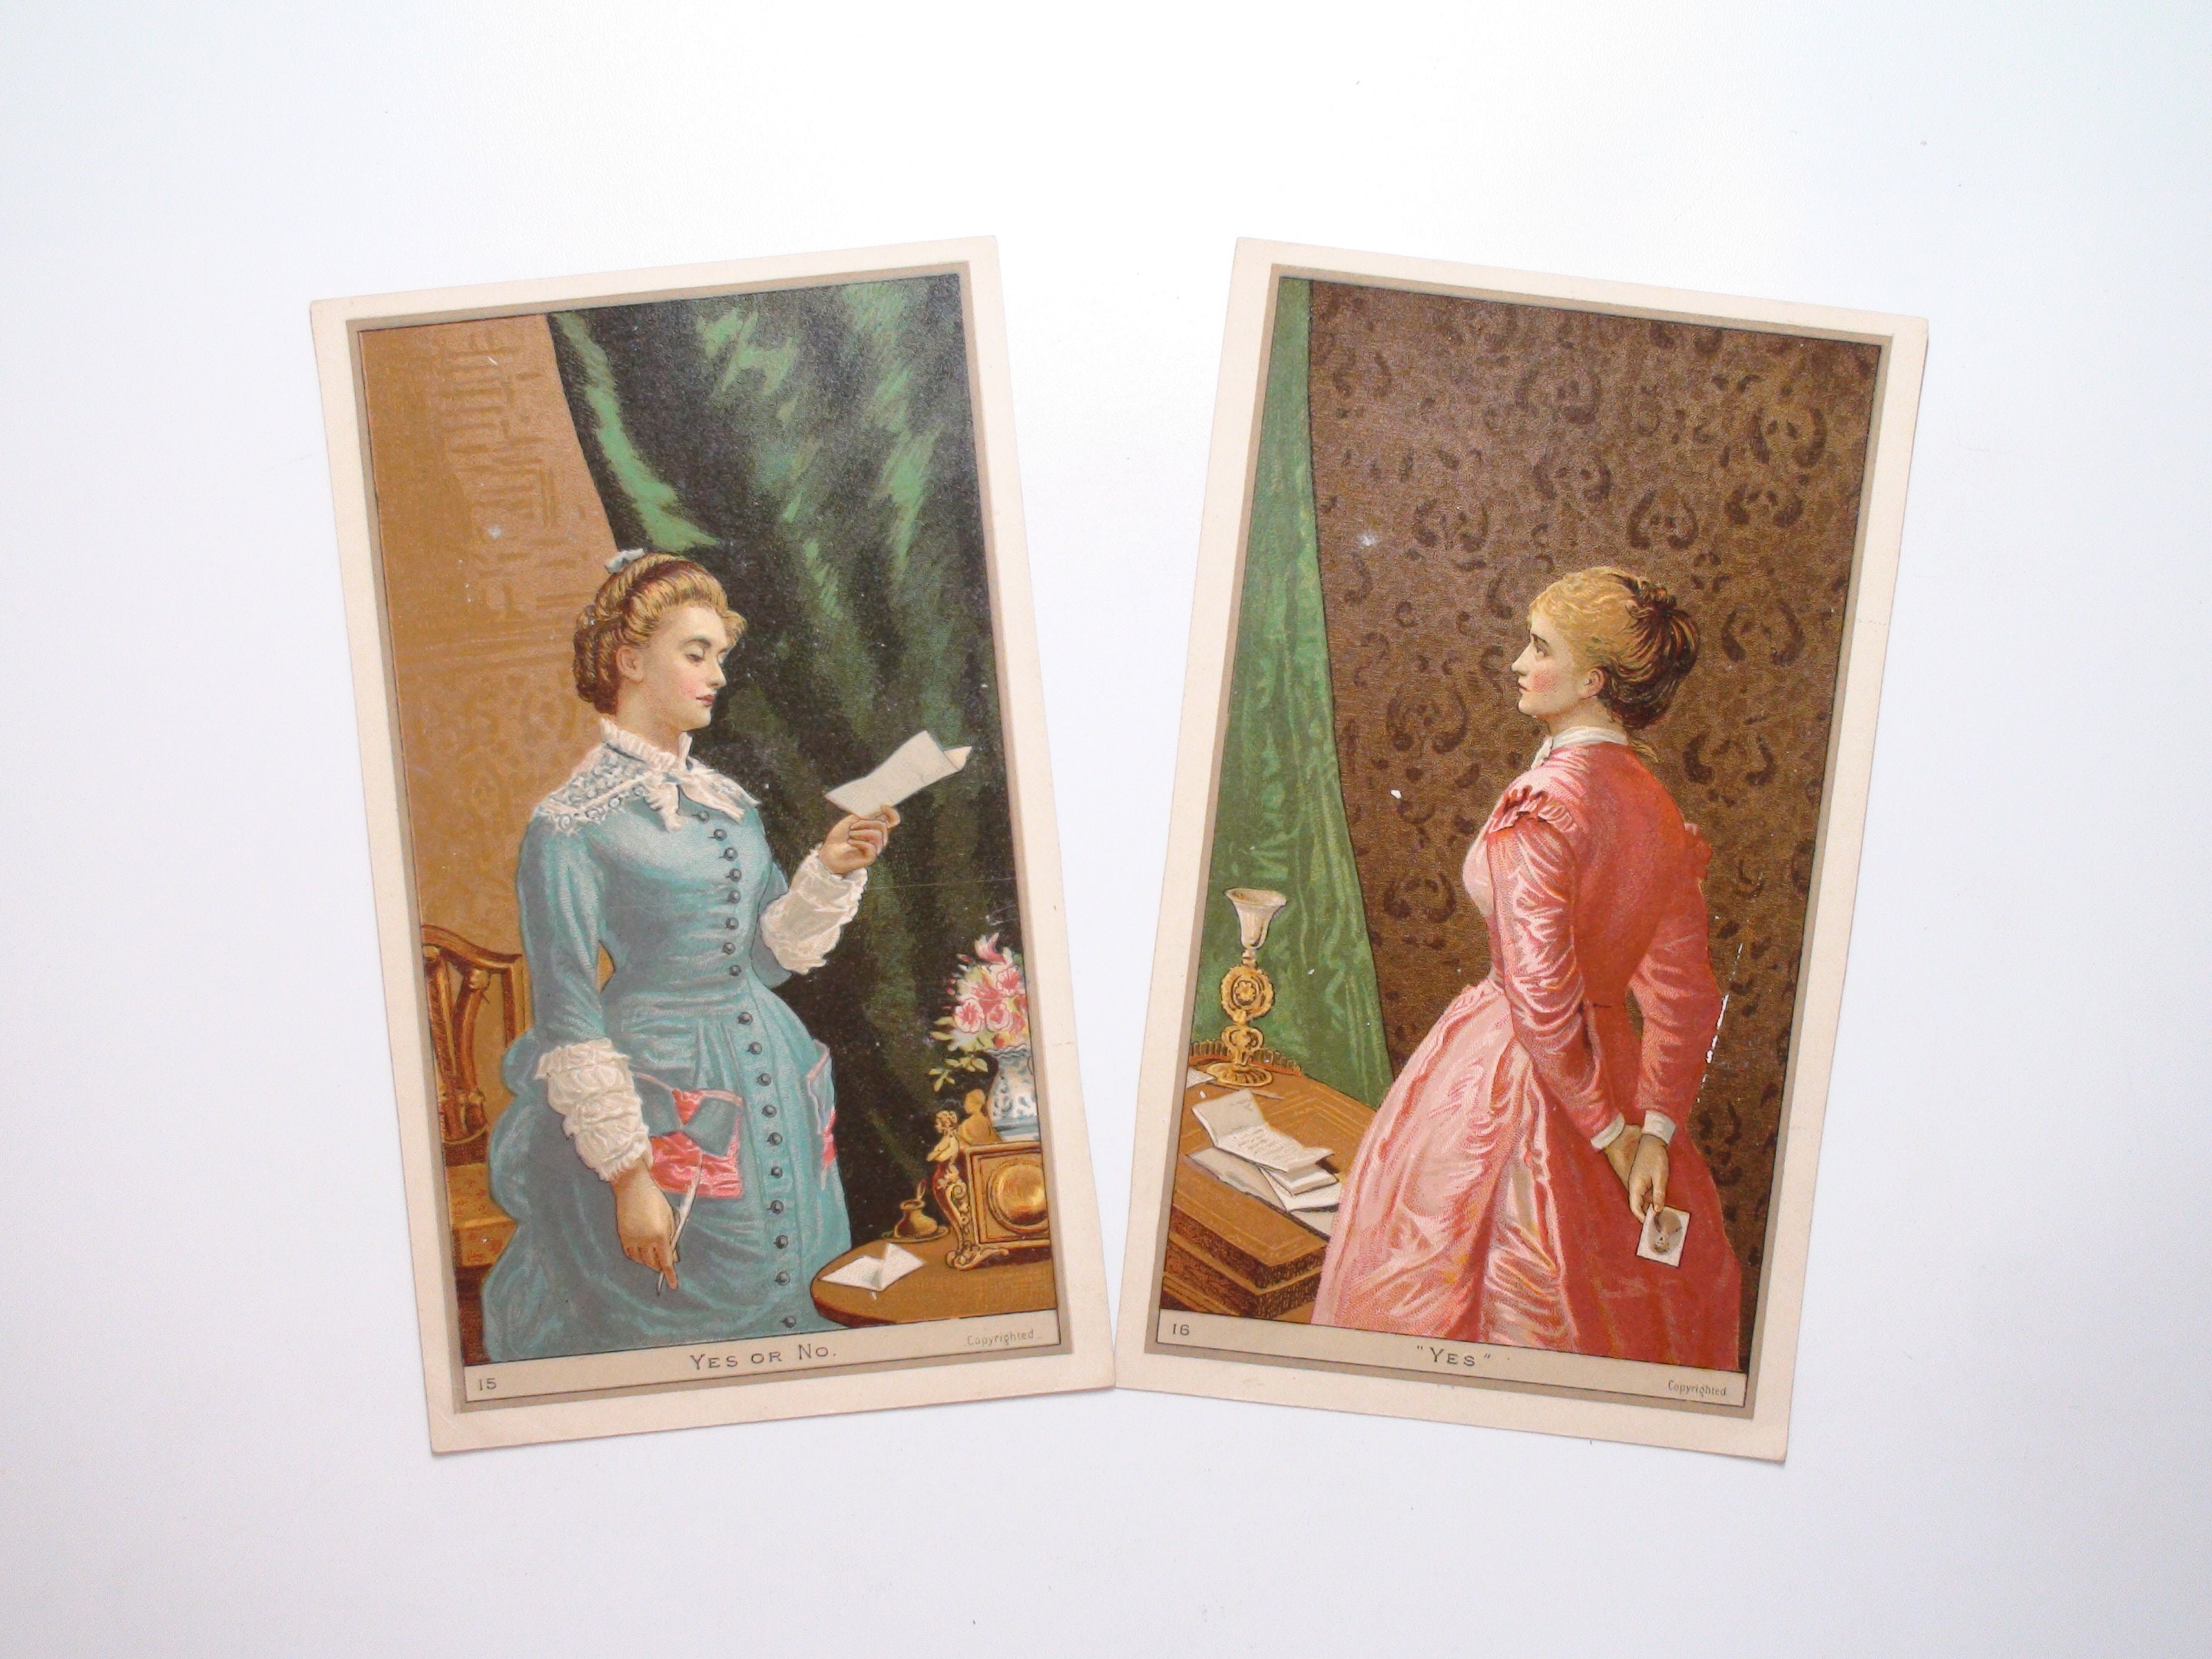 Lot of 6 Original Victorian Postcards in Excellent Condition - Etsy